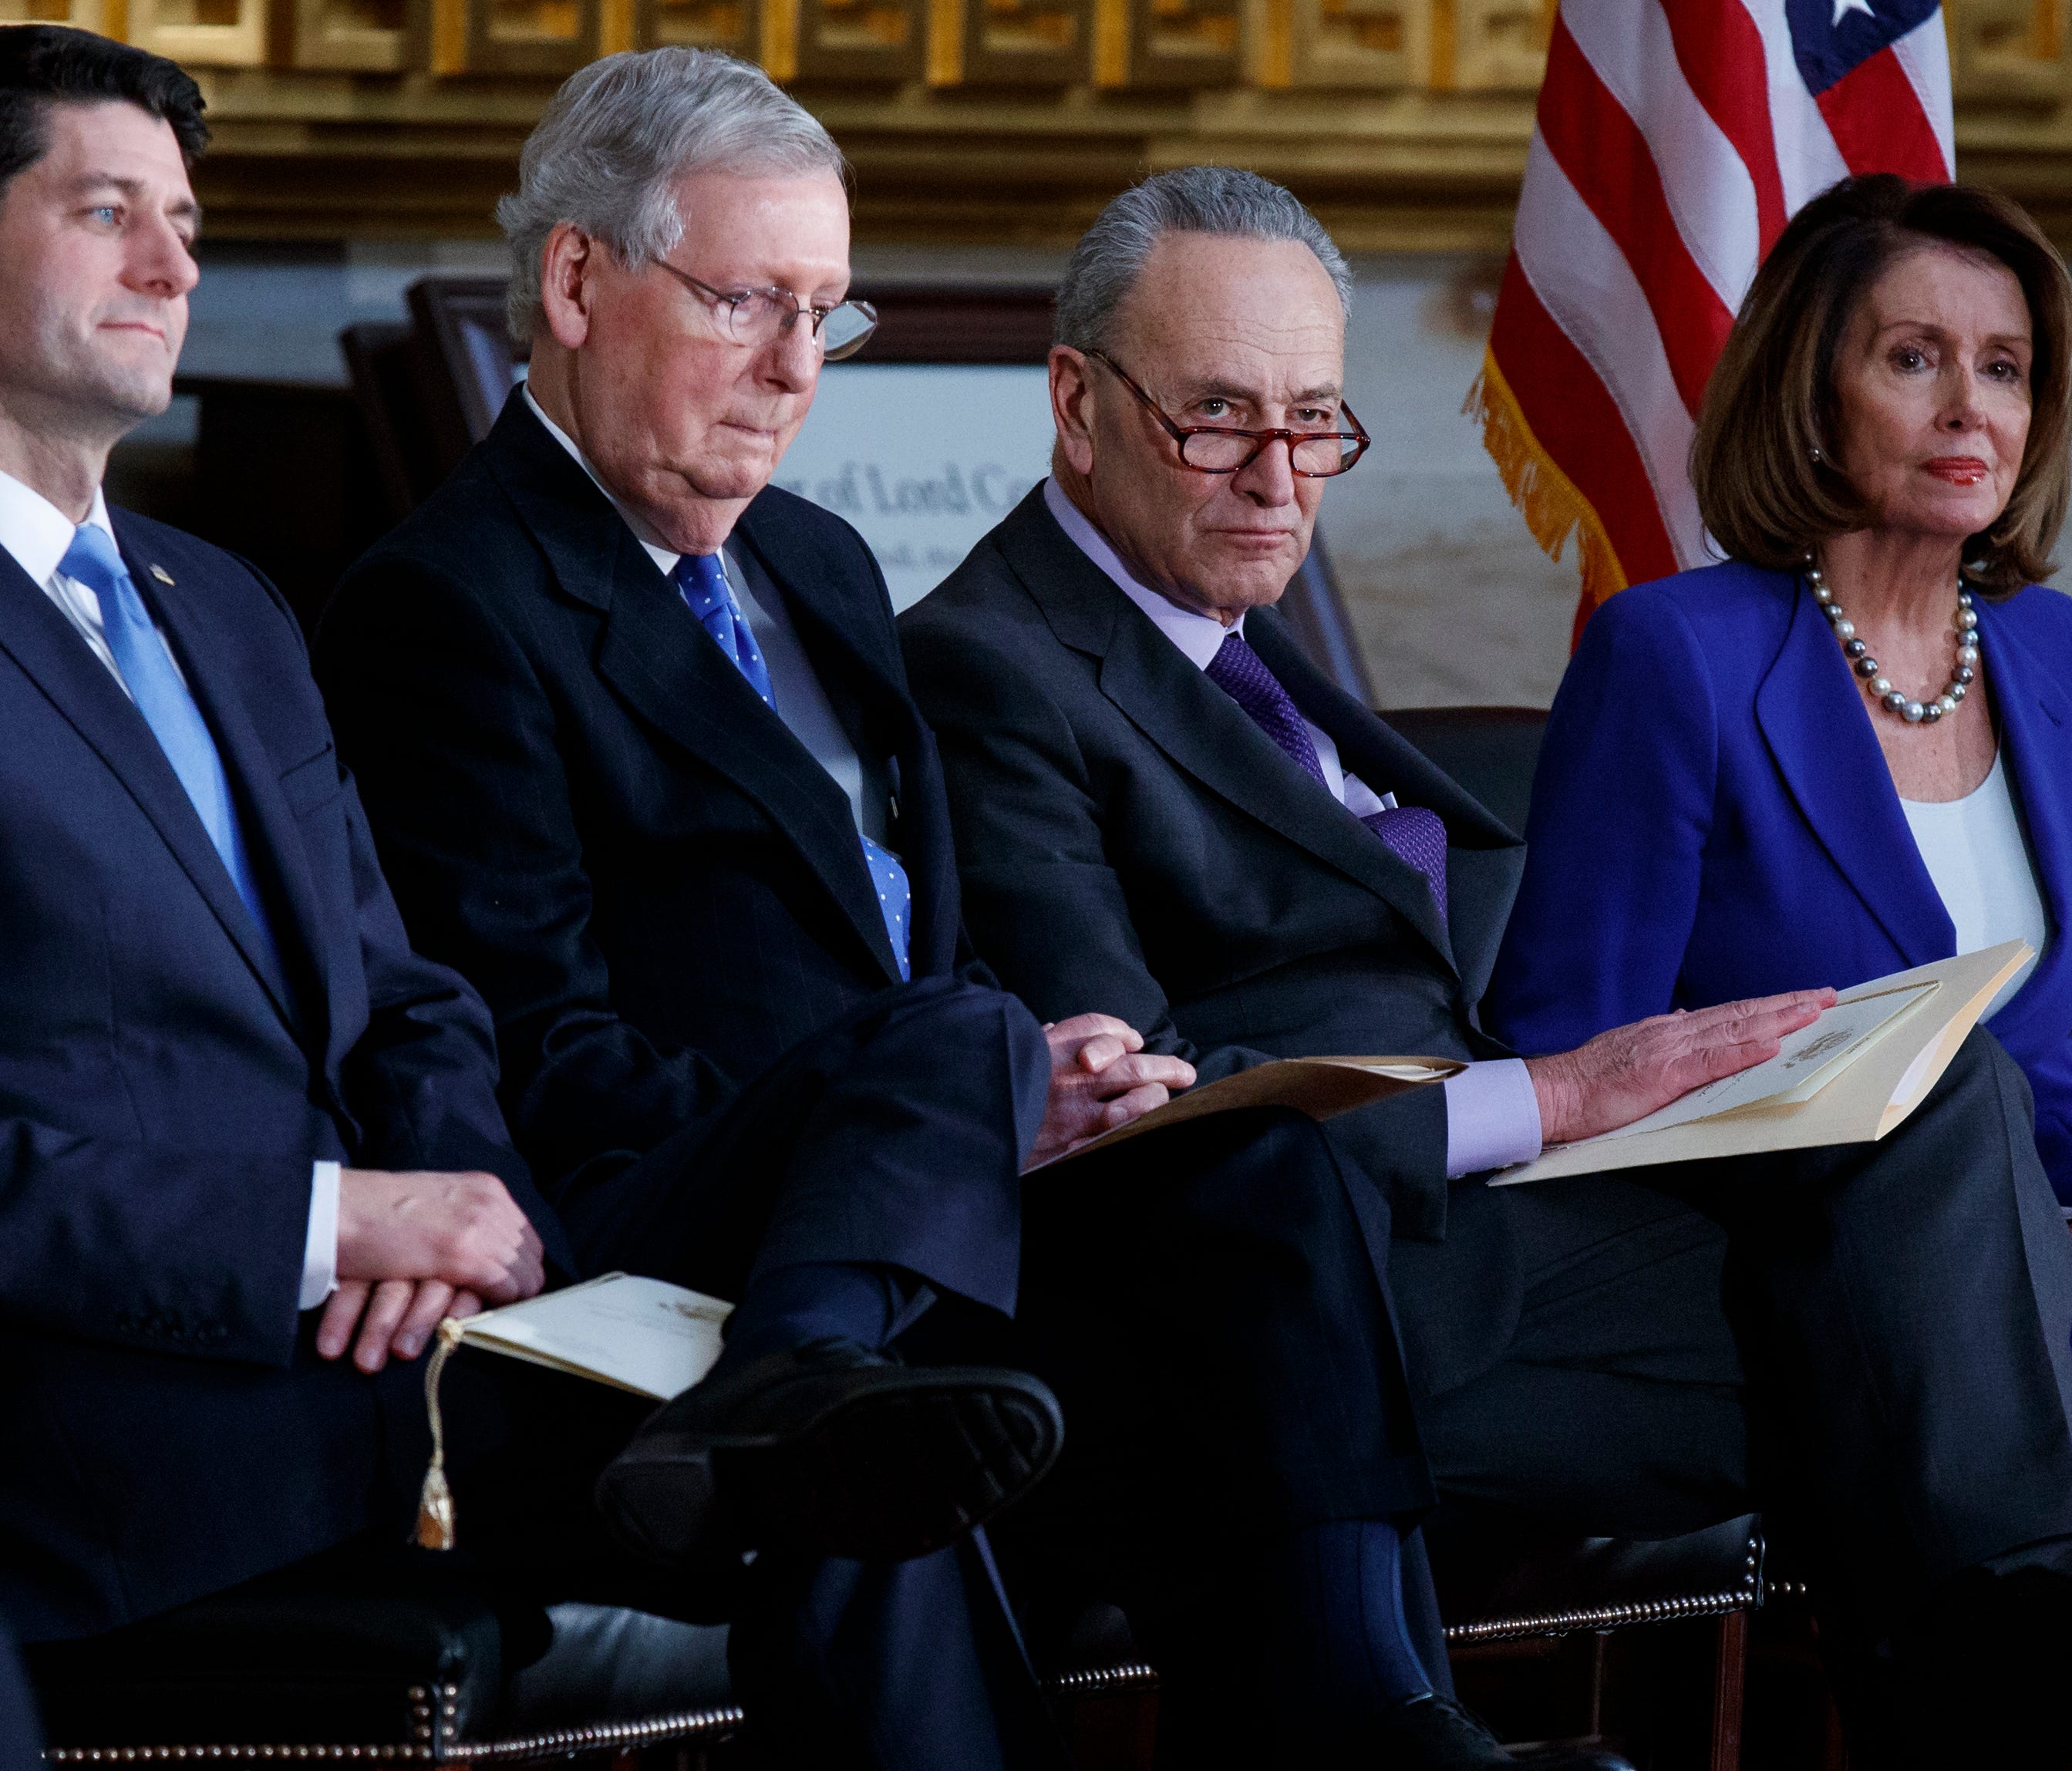 Speaker of the House Rep. Paul Ryan, R-Wis., Senate Majority Leader Mitch McConnell, R-Ky., Senate Minority Leader Chuck Schumer, D-N.Y., and House Minority Leader Rep. Nancy Pelosi, D-Calif., listen as President Donald Trump speaks during a Congress